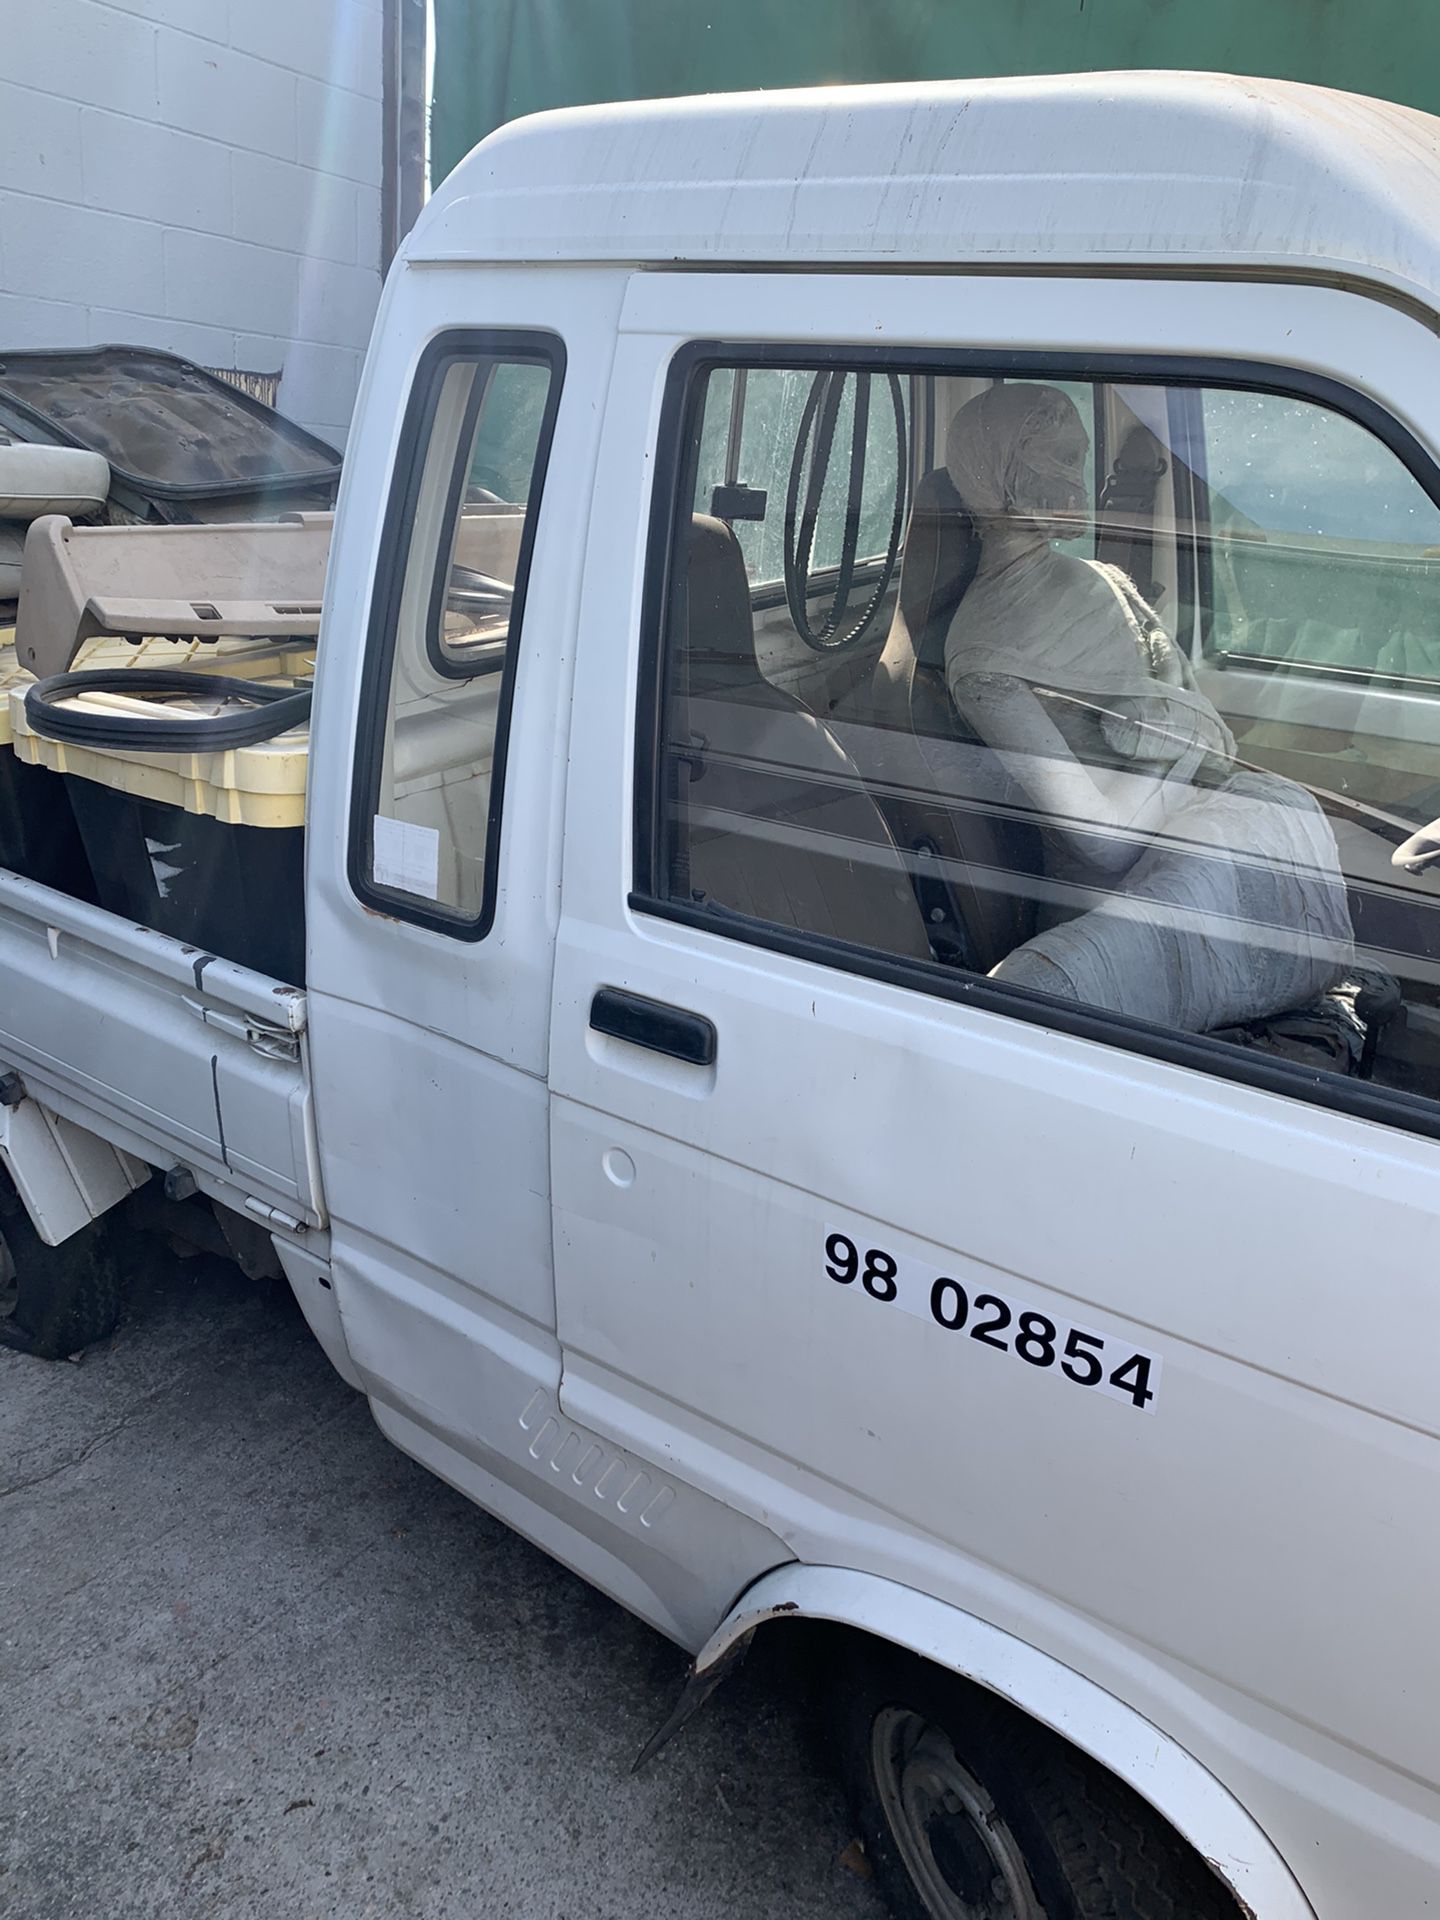 Daihatsu HiJet truck xtracab - IF AD IS UP IT IS AVAILABLE, read entire ad